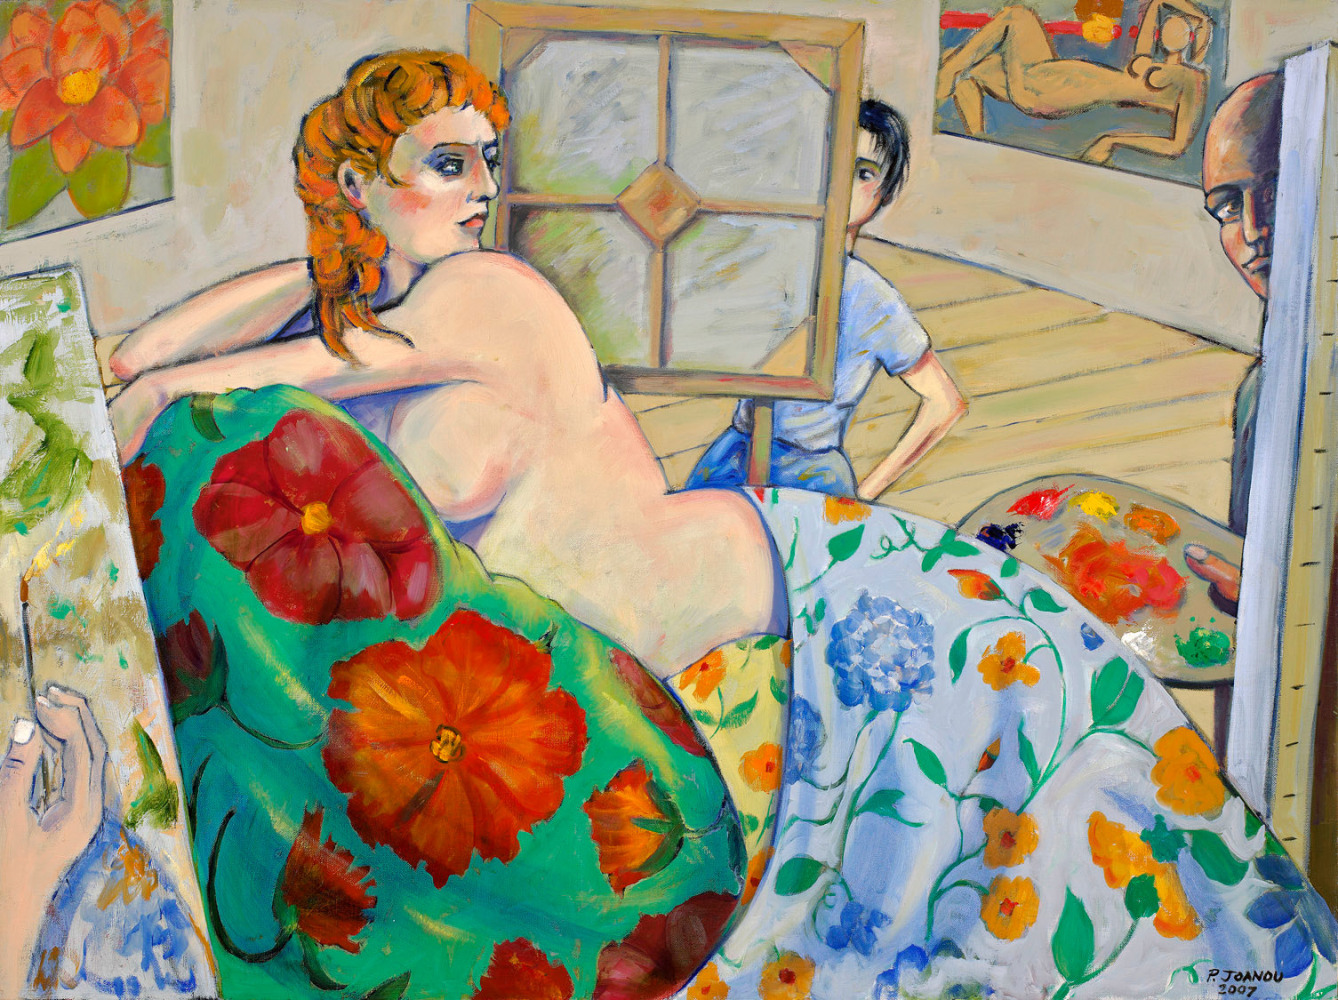 Artist and Model, 2007

oil on canvas

30 x 40 inches; 76.2 x 101.6 cm

LSFA# 11262